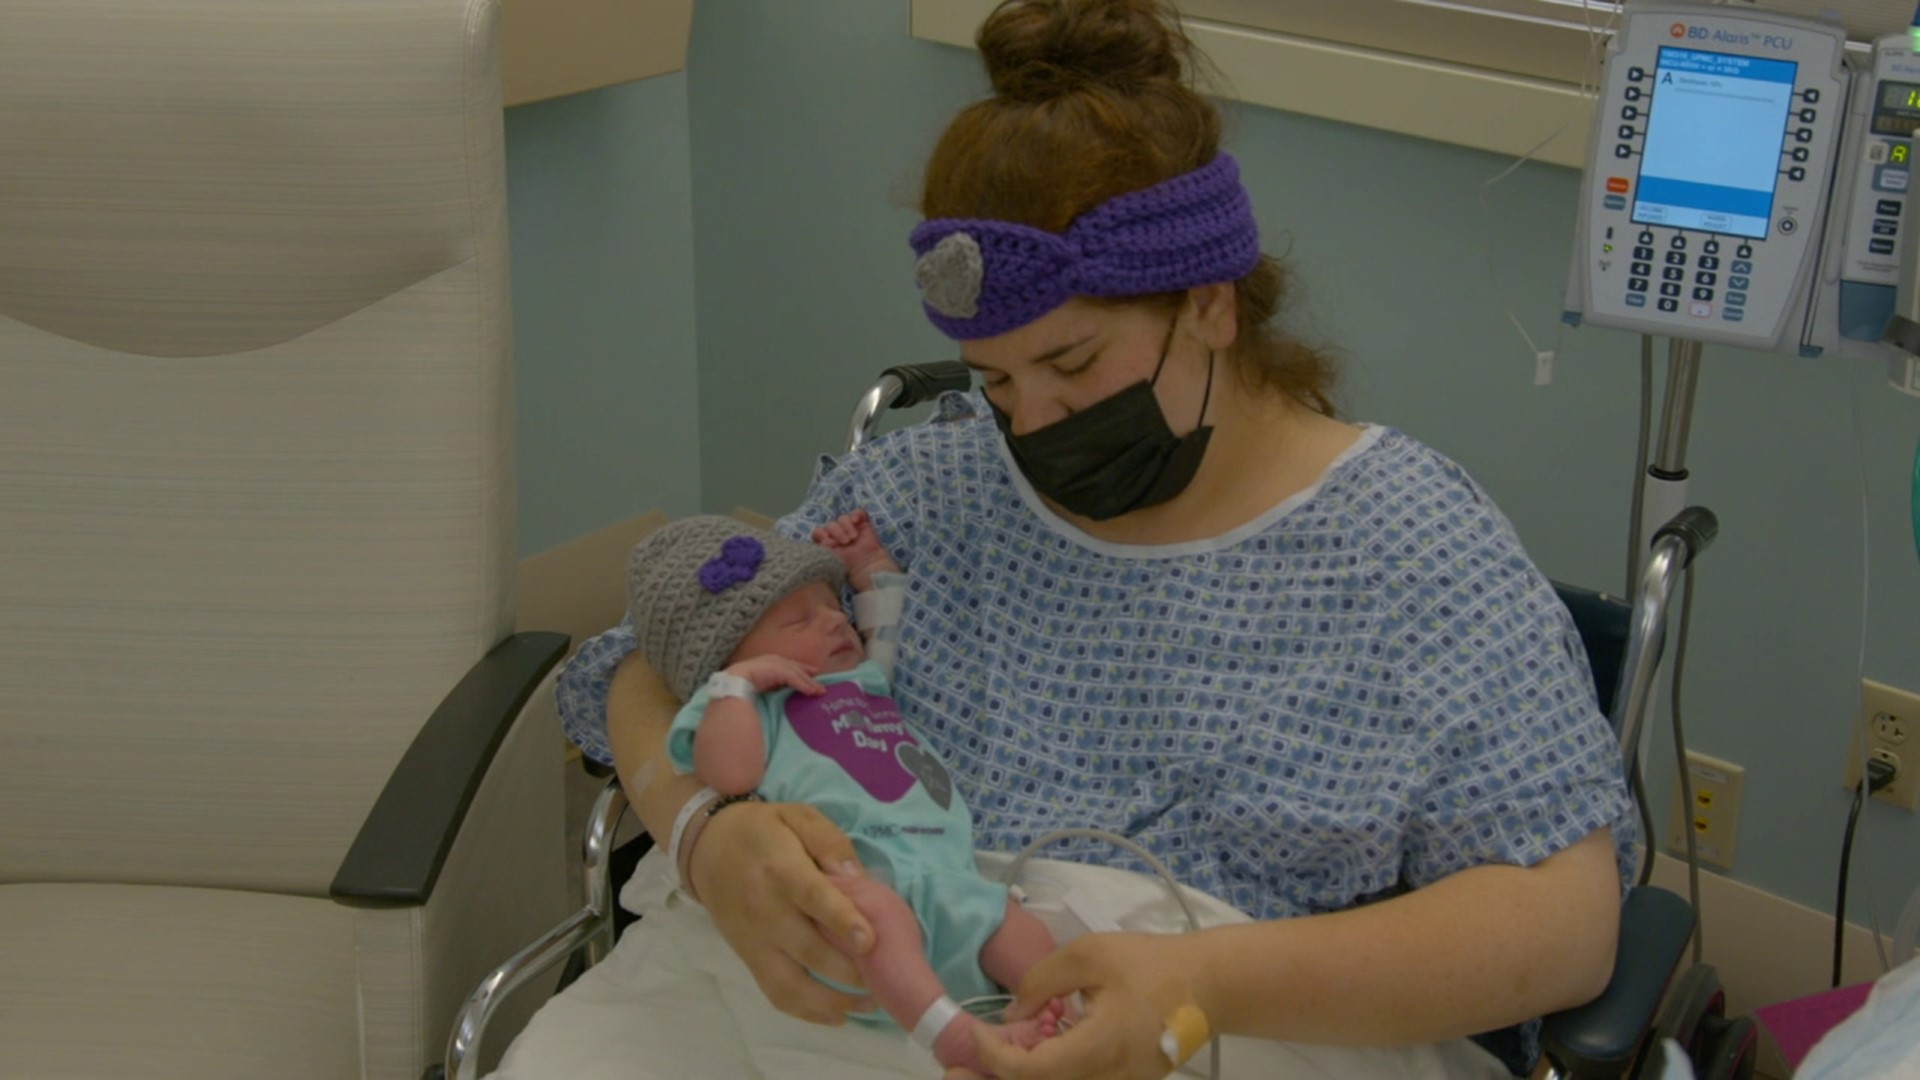 The special day was especially significant for new mothers at UPMC Williamsport.